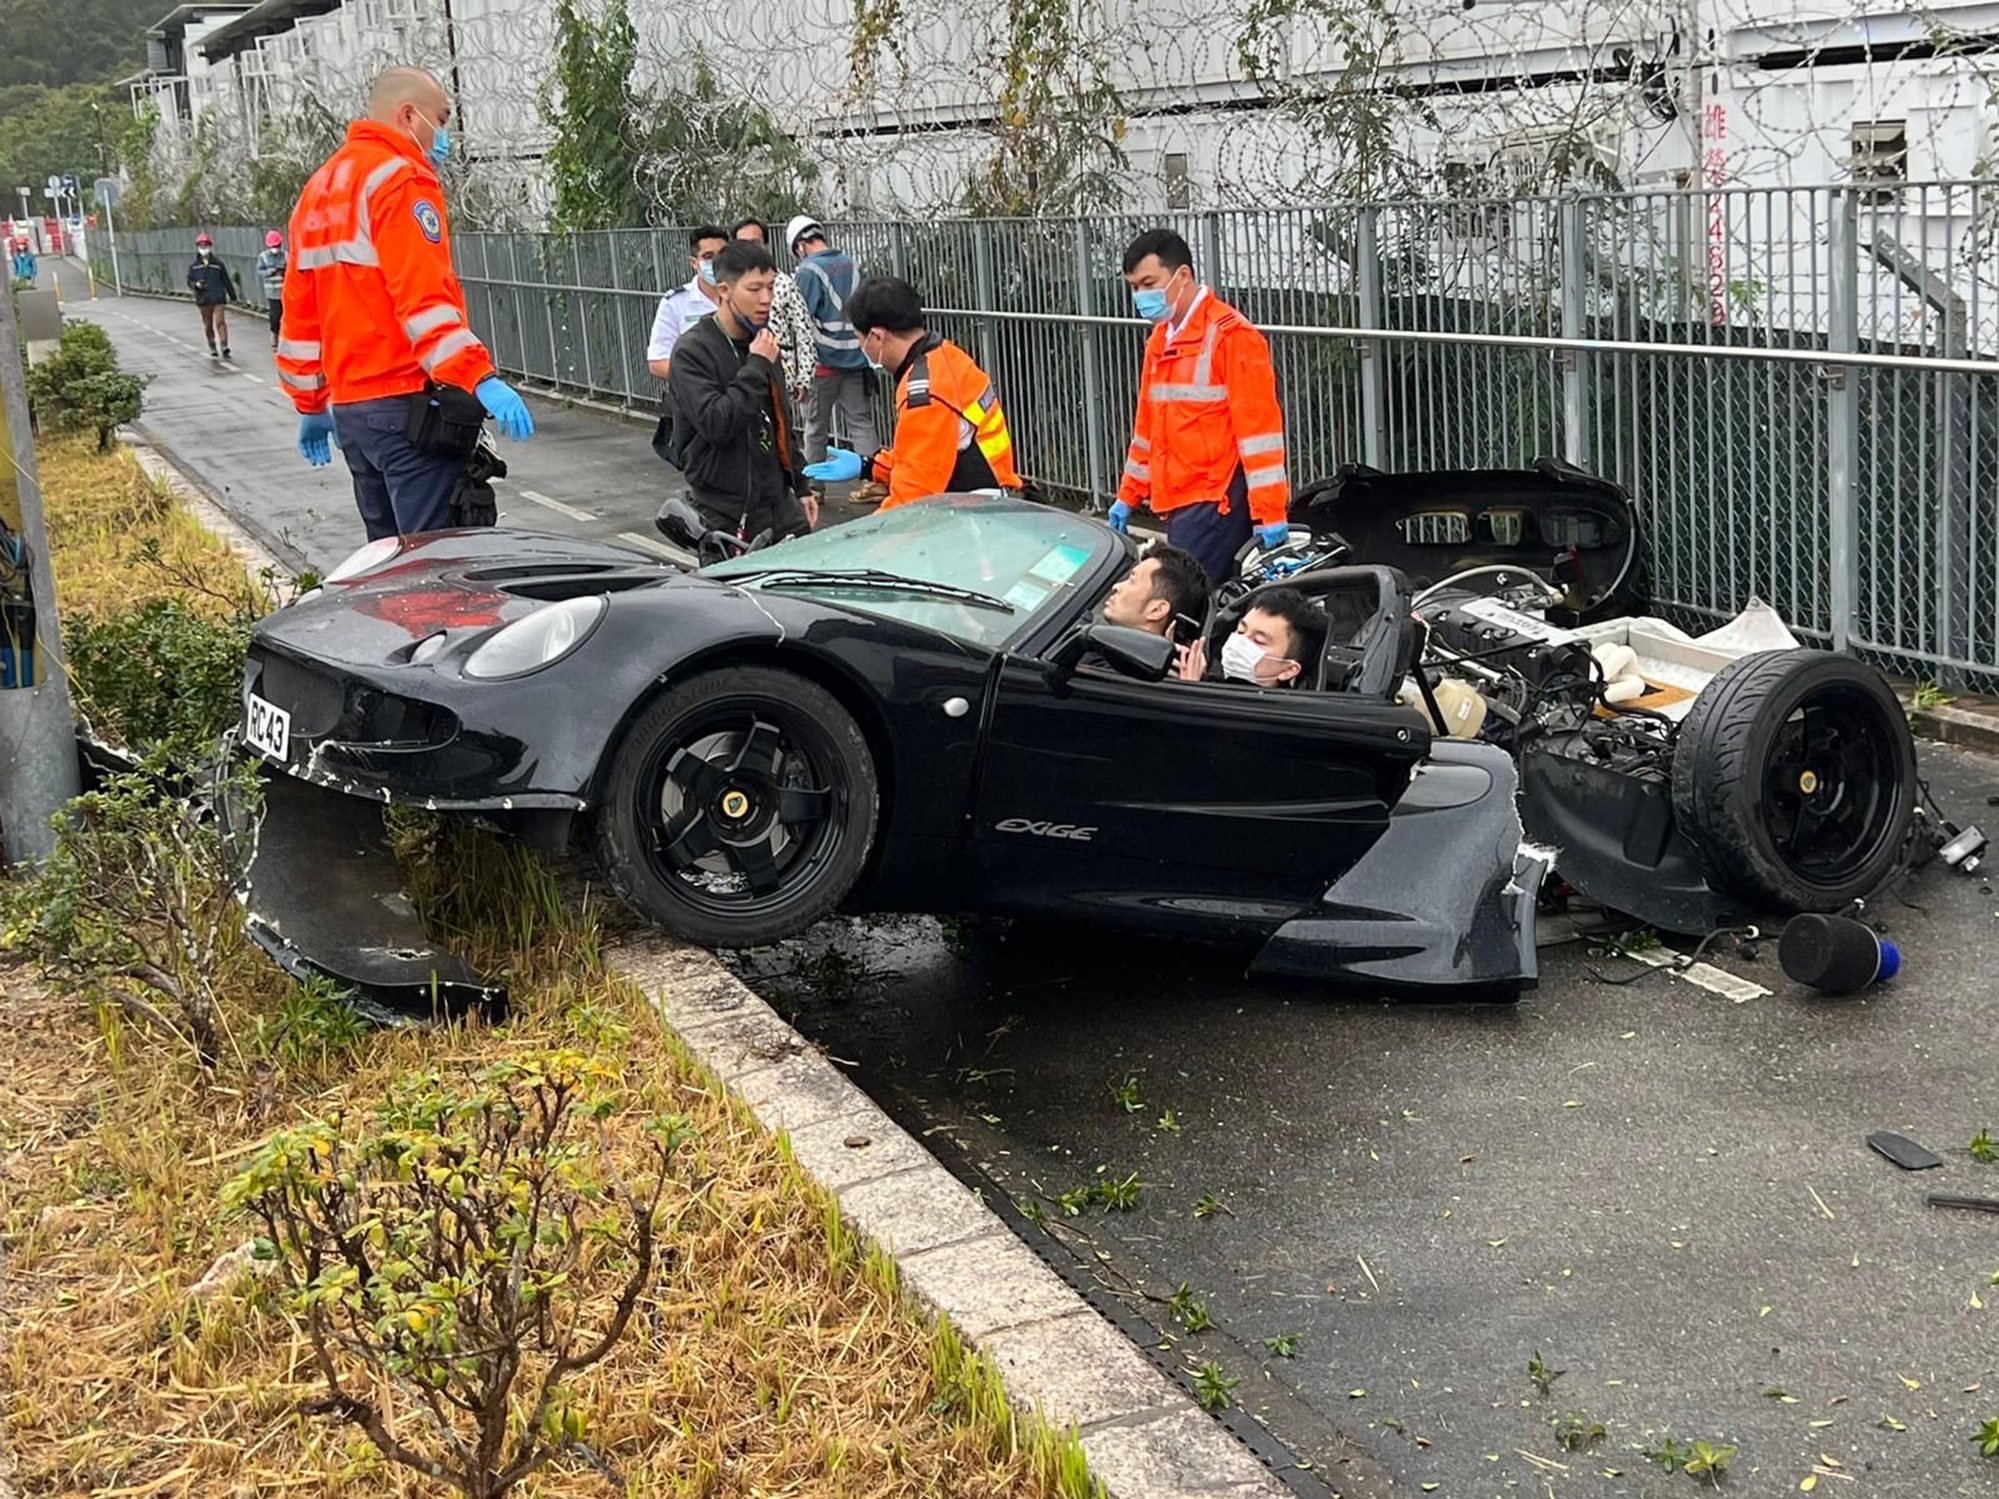 Hong Kong driver and passenger narrowly avoid death as airborne Black Lotus  Exige slams into lamp post and splits nearly in half | South China Morning  Post